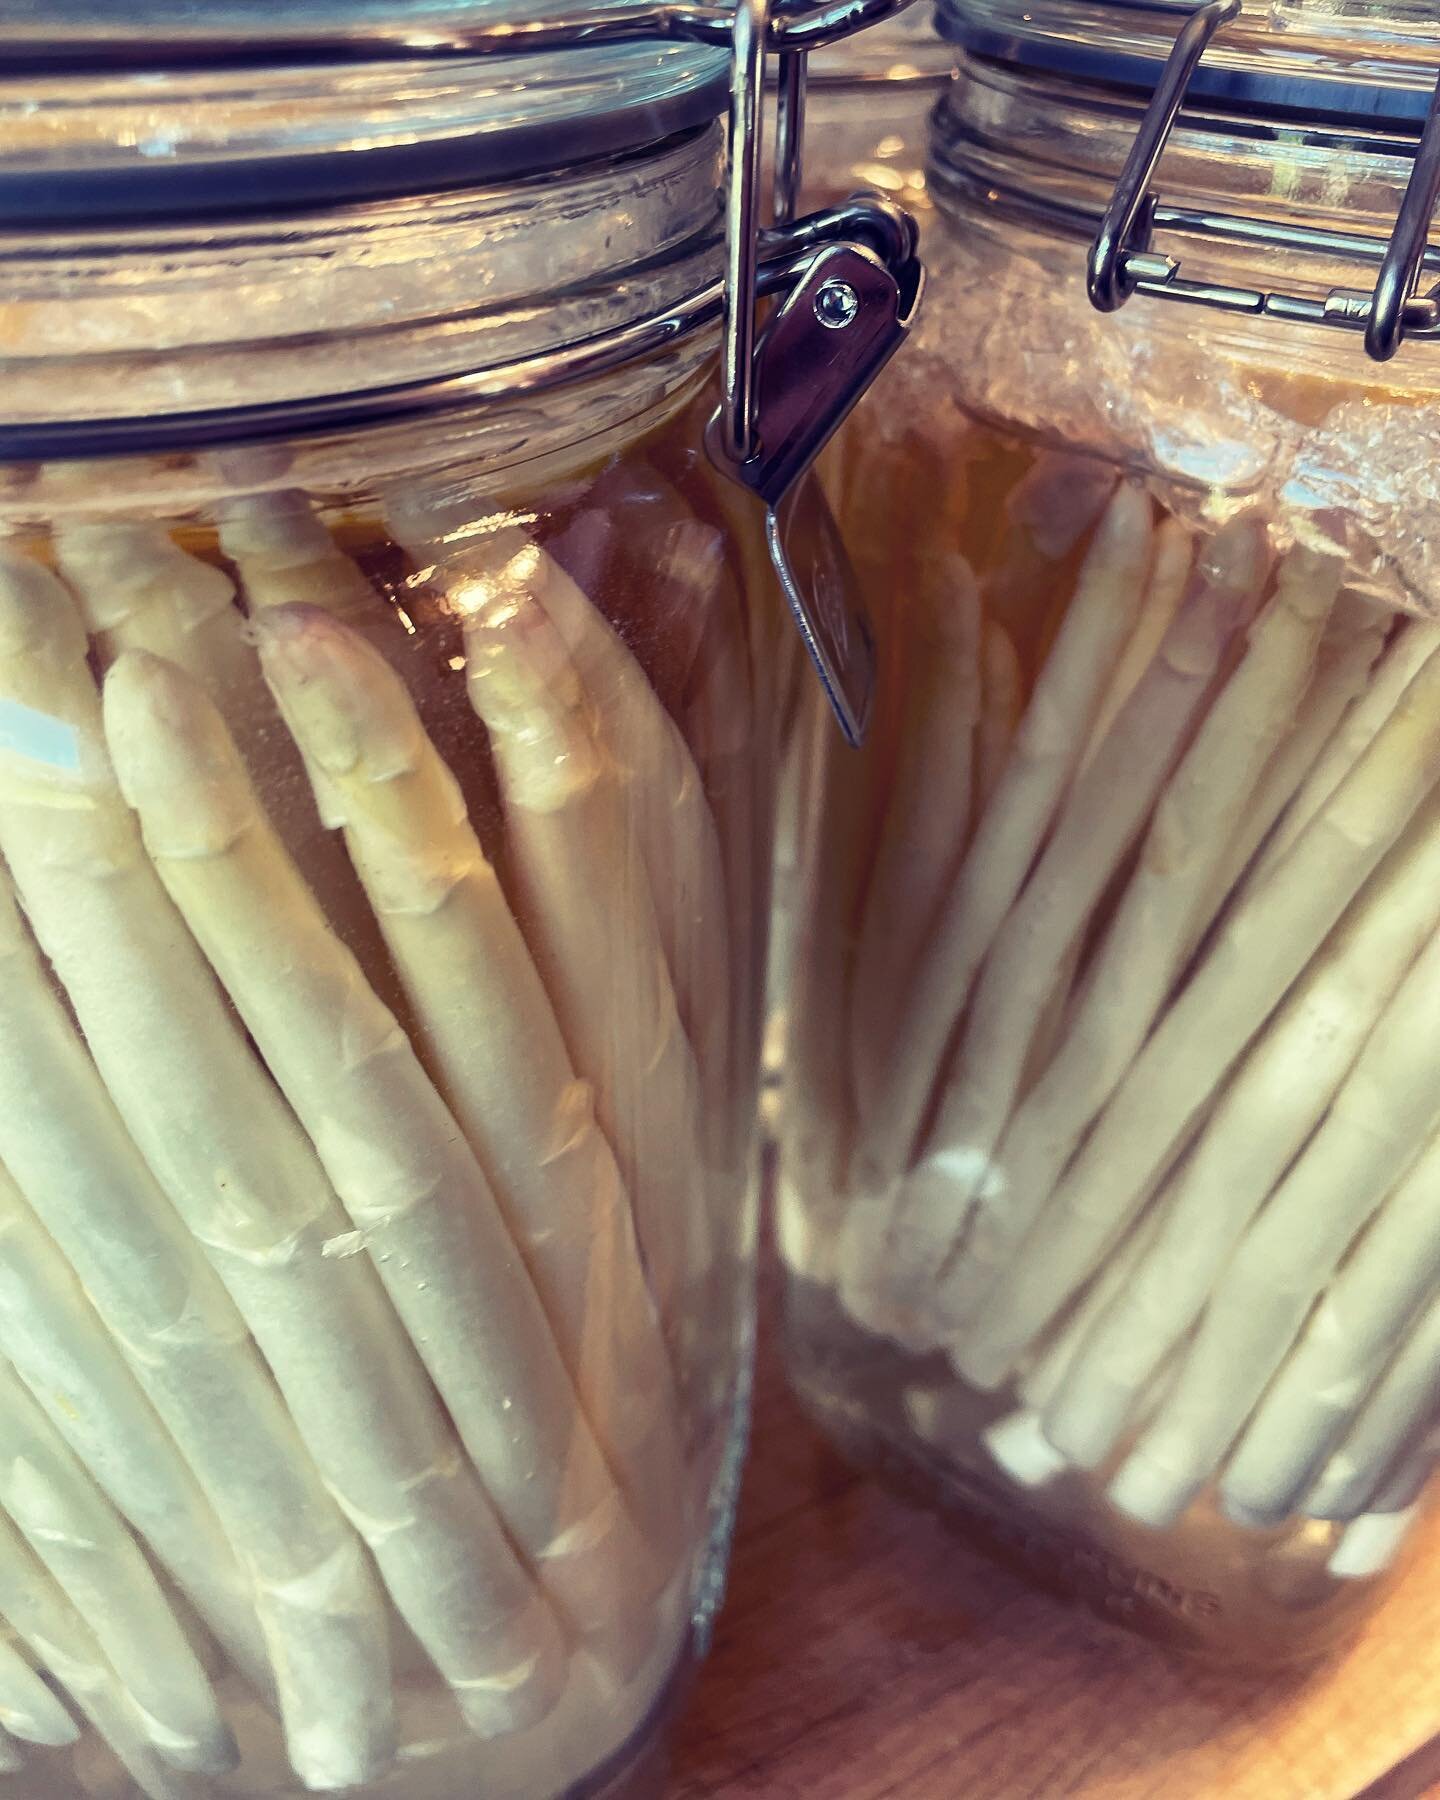 Pantry Building.

The best part of building a pantry is preserving short micro seasons to use in the future. White asparagus. The earliest of early spring is showing it&rsquo;s form.

I&rsquo;ve had many failed attempts at preserving in the past and 